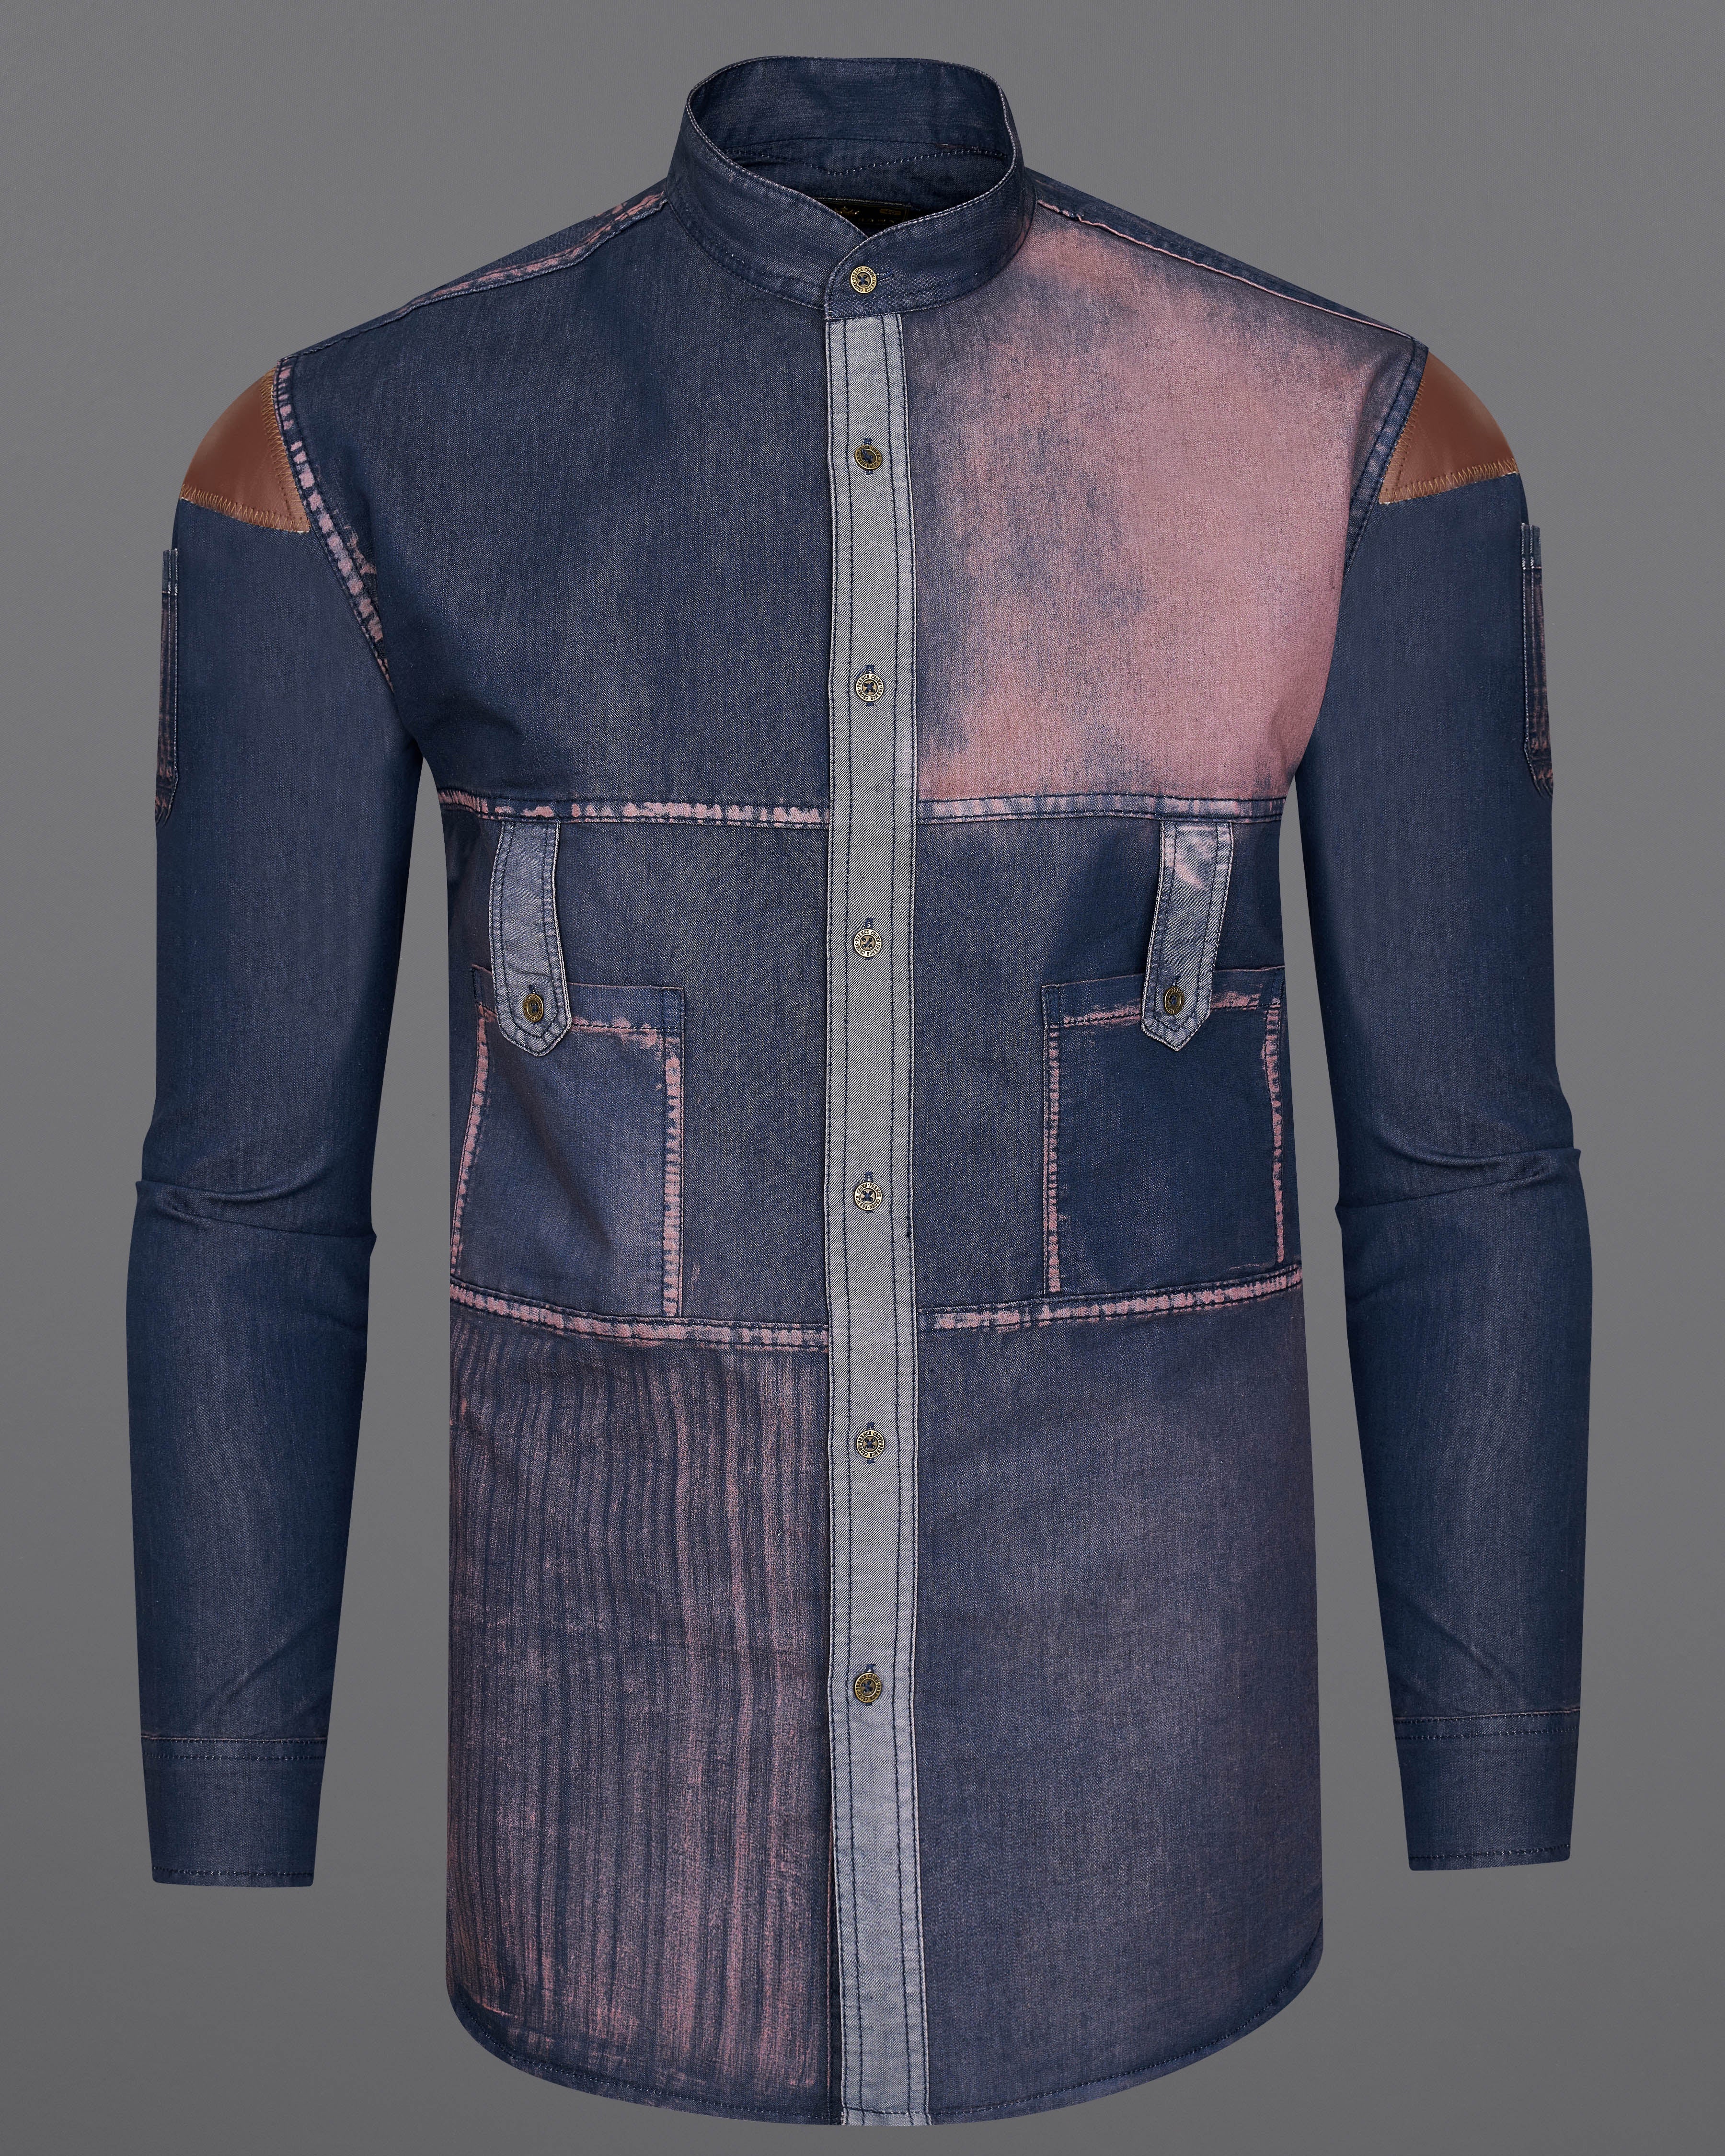 Bunting Blue with Opium Rusted Denim Shirt  With Leather Patch Work 9206-M-MB-38,9206-M-MB-H-38,9206-M-MB-39,9206-M-MB-H-39,9206-M-MB-40,9206-M-MB-H-40,9206-M-MB-42,9206-M-MB-H-42,9206-M-MB-44,9206-M-MB-H-44,9206-M-MB-46,9206-M-MB-H-46,9206-M-MB-48,9206-M-MB-H-48,9206-M-MB-50,9206-M-MB-H-50,9206-M-MB-52,9206-M-MB-H-52